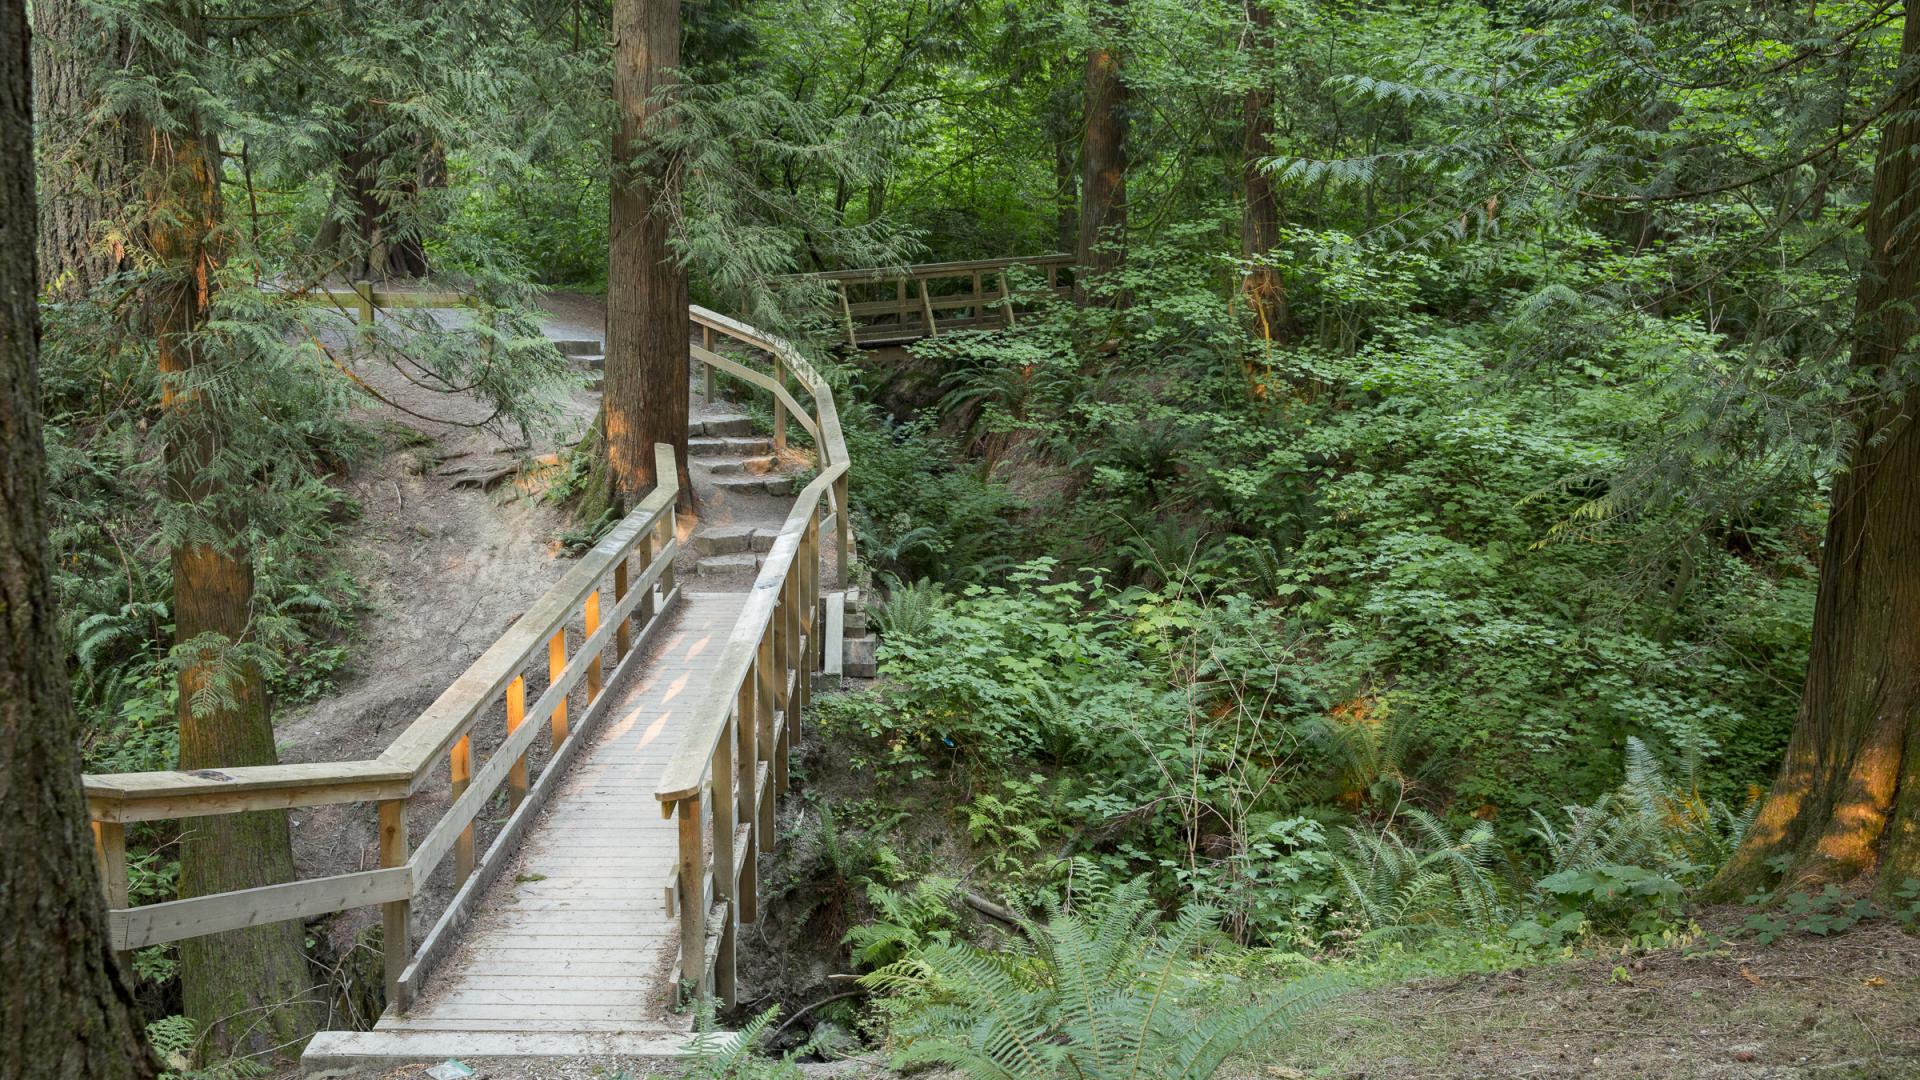 A wooden path bridge on a mulched trail in a green forest.